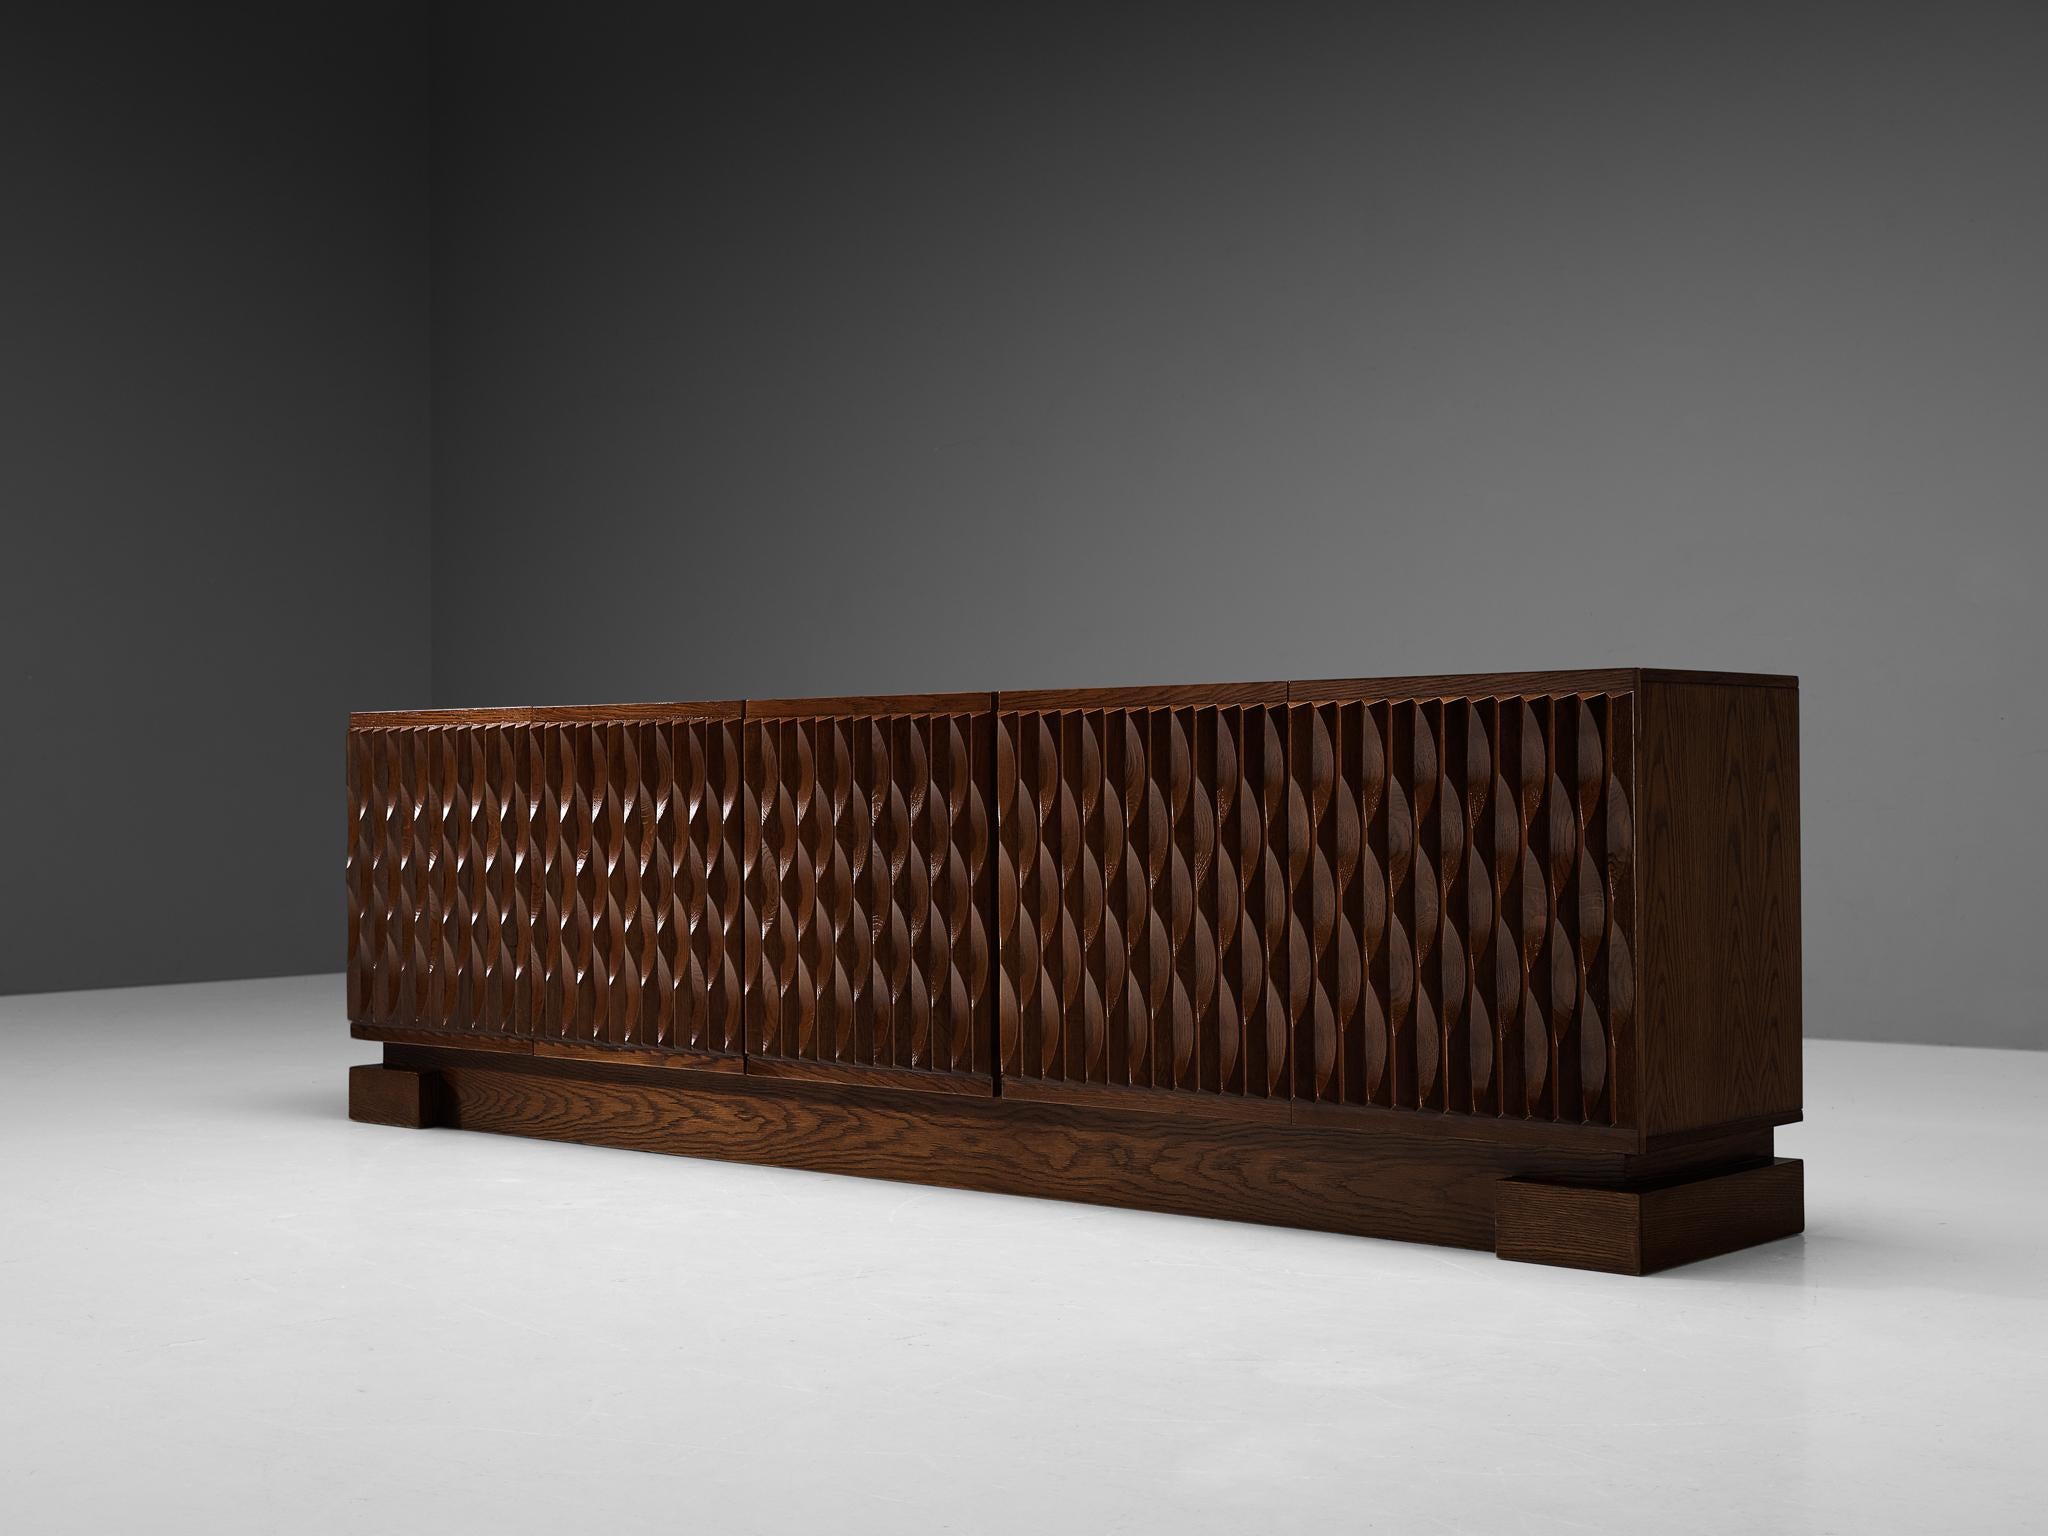 De Coene, sideboard, stained oak, Belgium, 1970s.

This sideboard with geometric doors is manufactured by De Coene. The cabinet shows an intriguing graphic pattern on its doors. The five beautifully carved doors provide access to the storage space